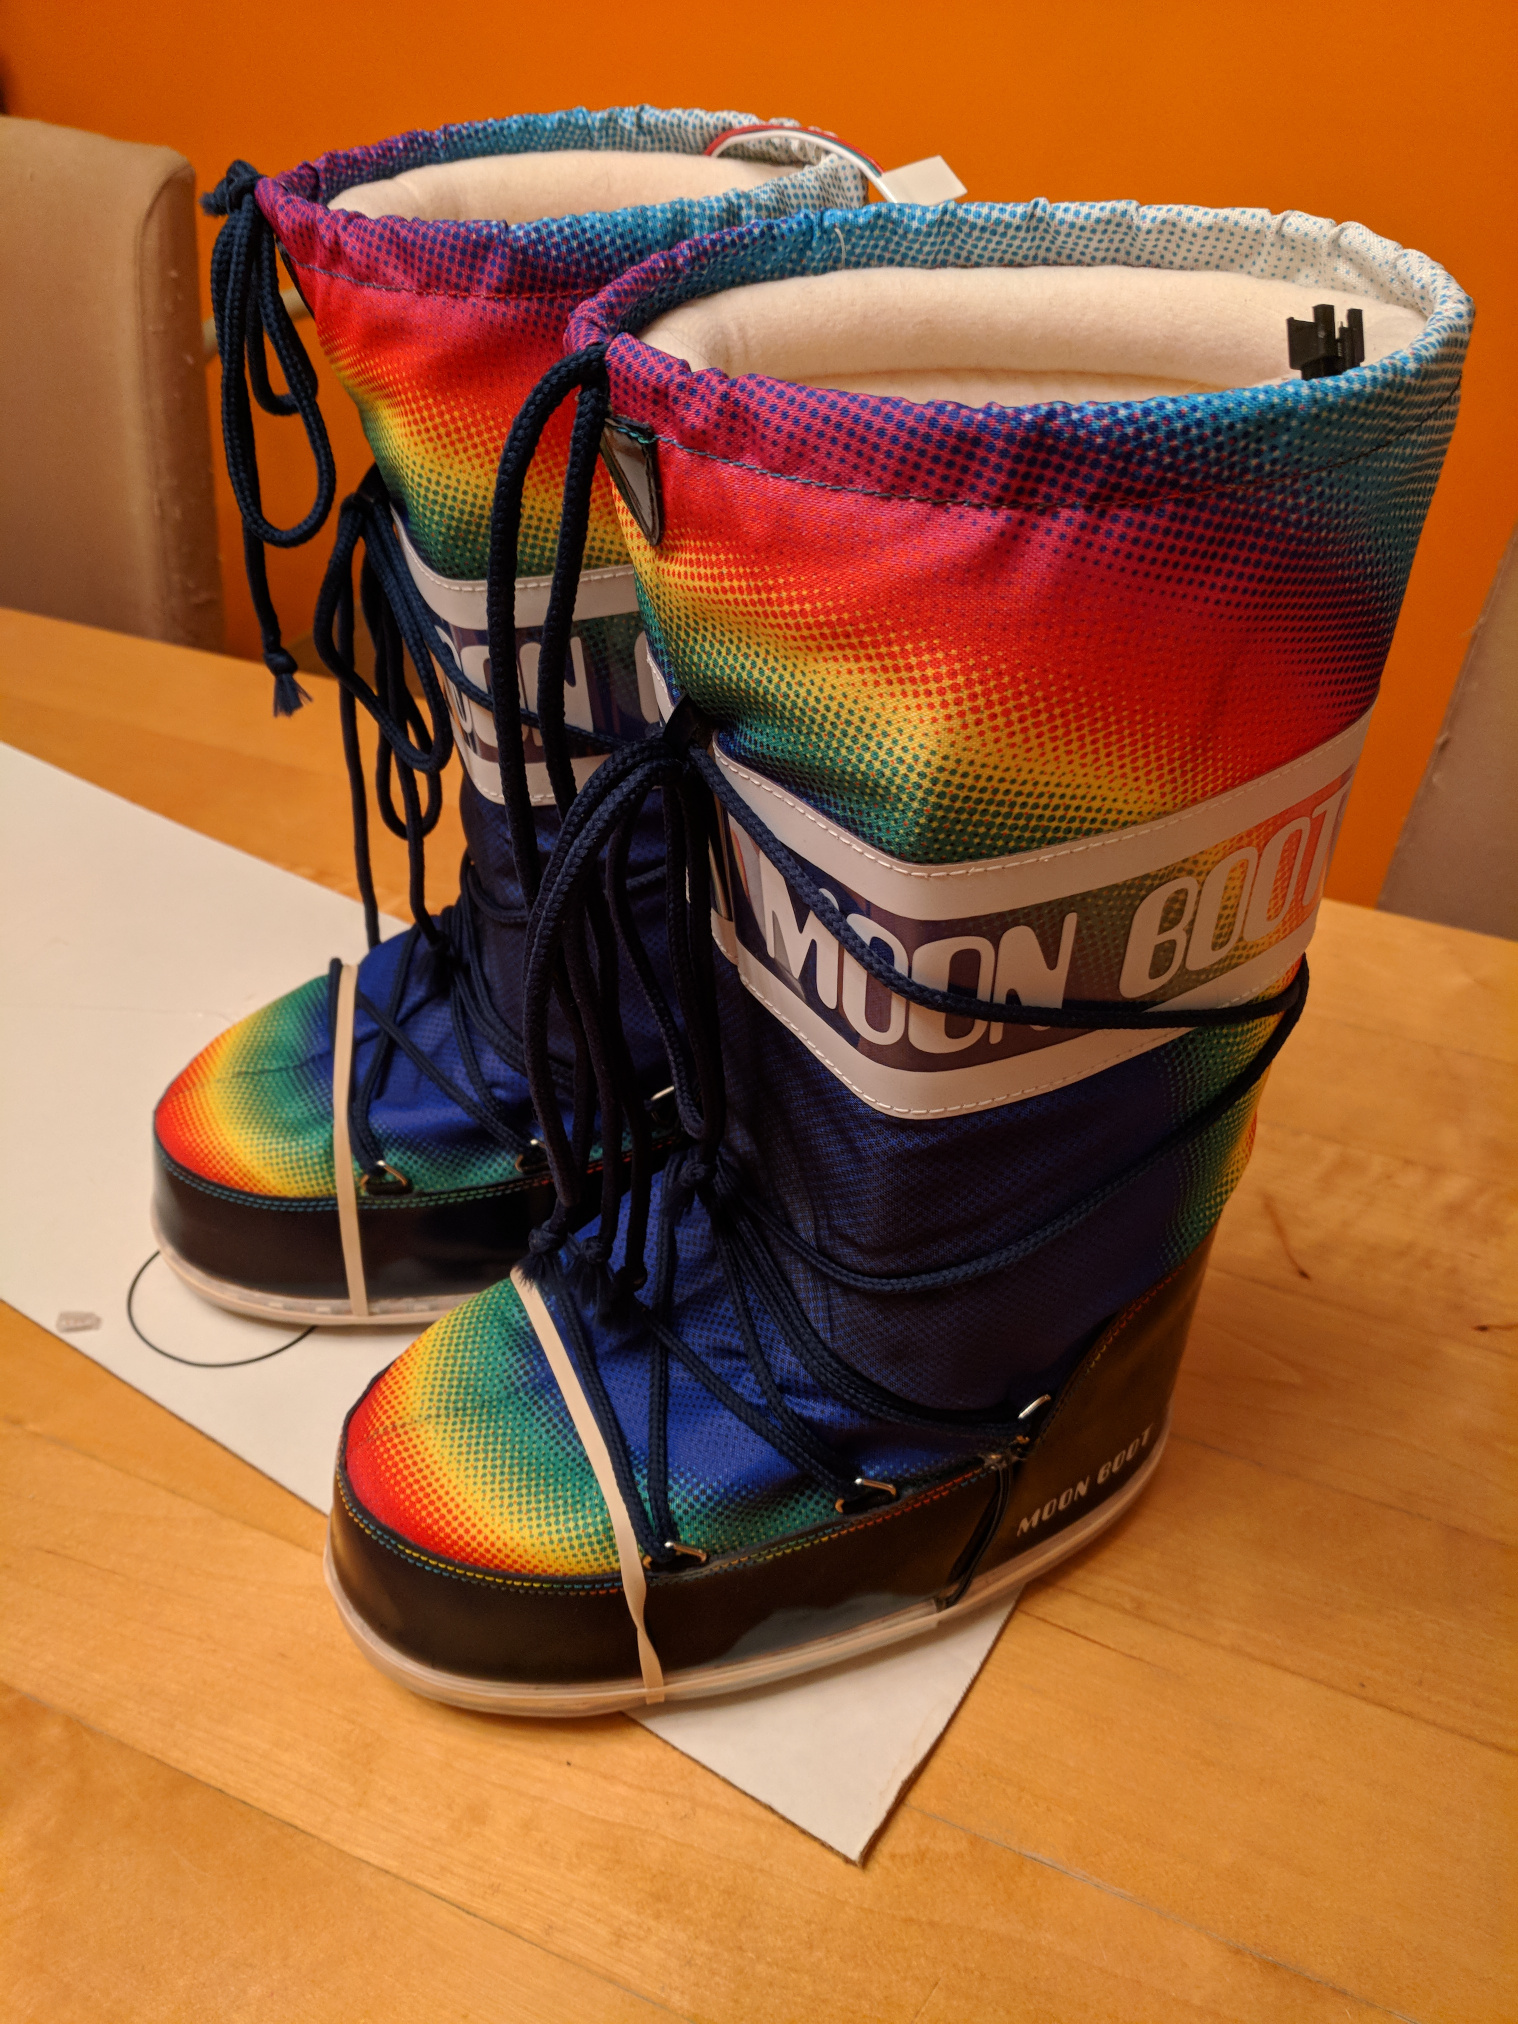 A pair of rainbow moon boots with rubber bands around the toes to hold LED strips in place along the edge of the soles.